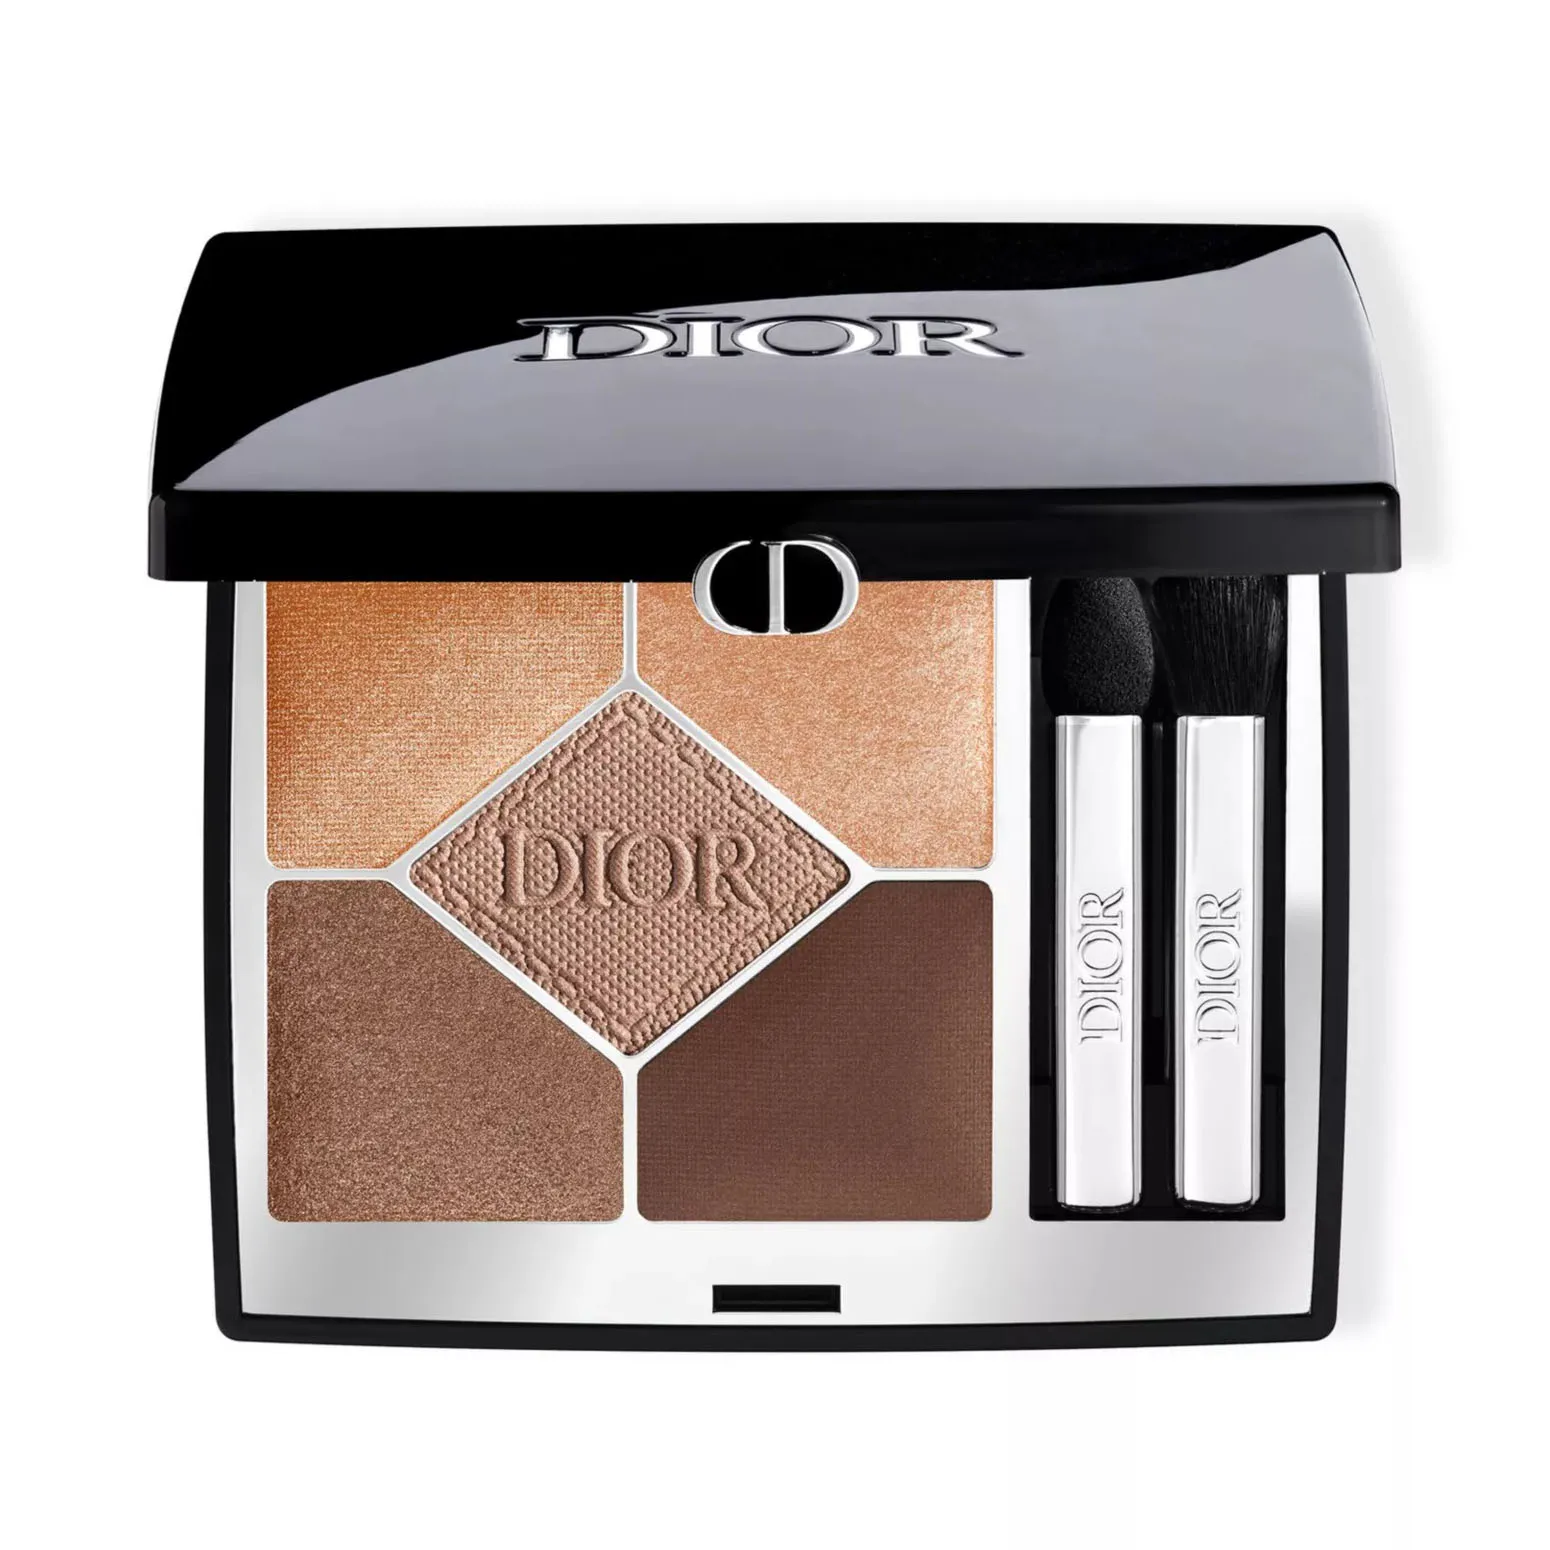 Miss Dior Palette Makeup Palette in a Limited Edition  DIOR